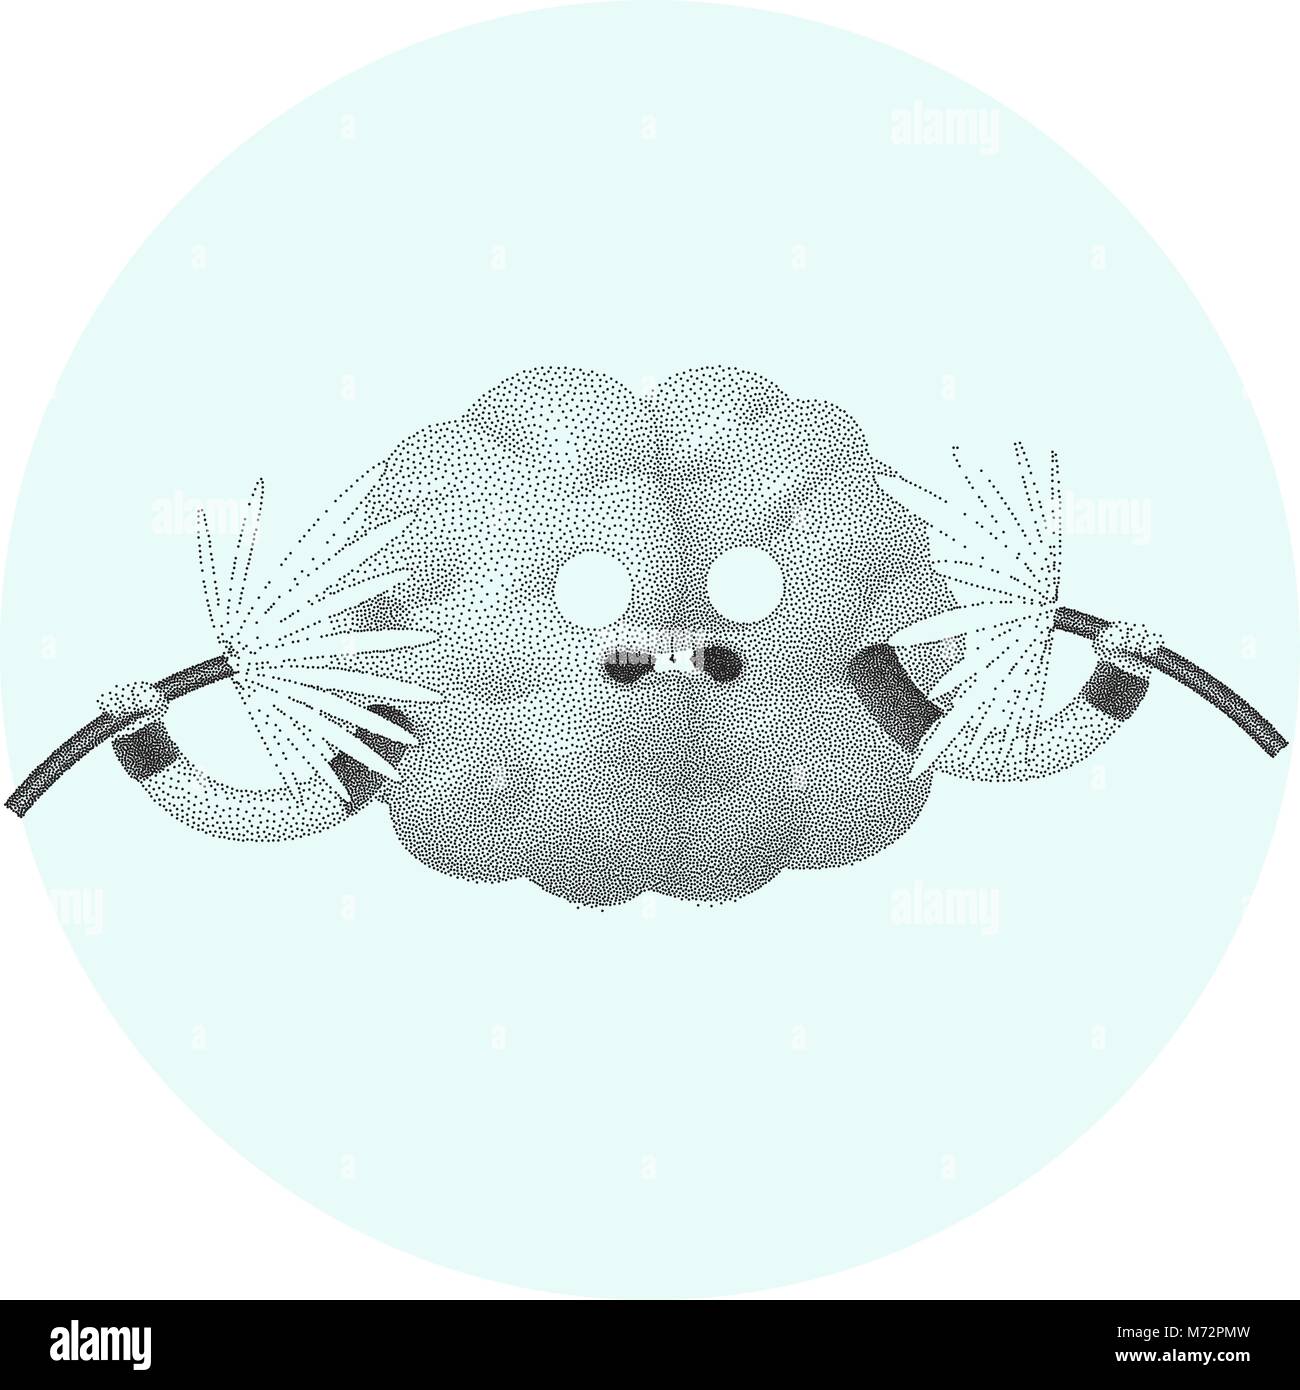 Shocked brain holding two sparking electrical cables dotted cartoon illustration - train your brain series. Part of the Brain collection. Stock Vector